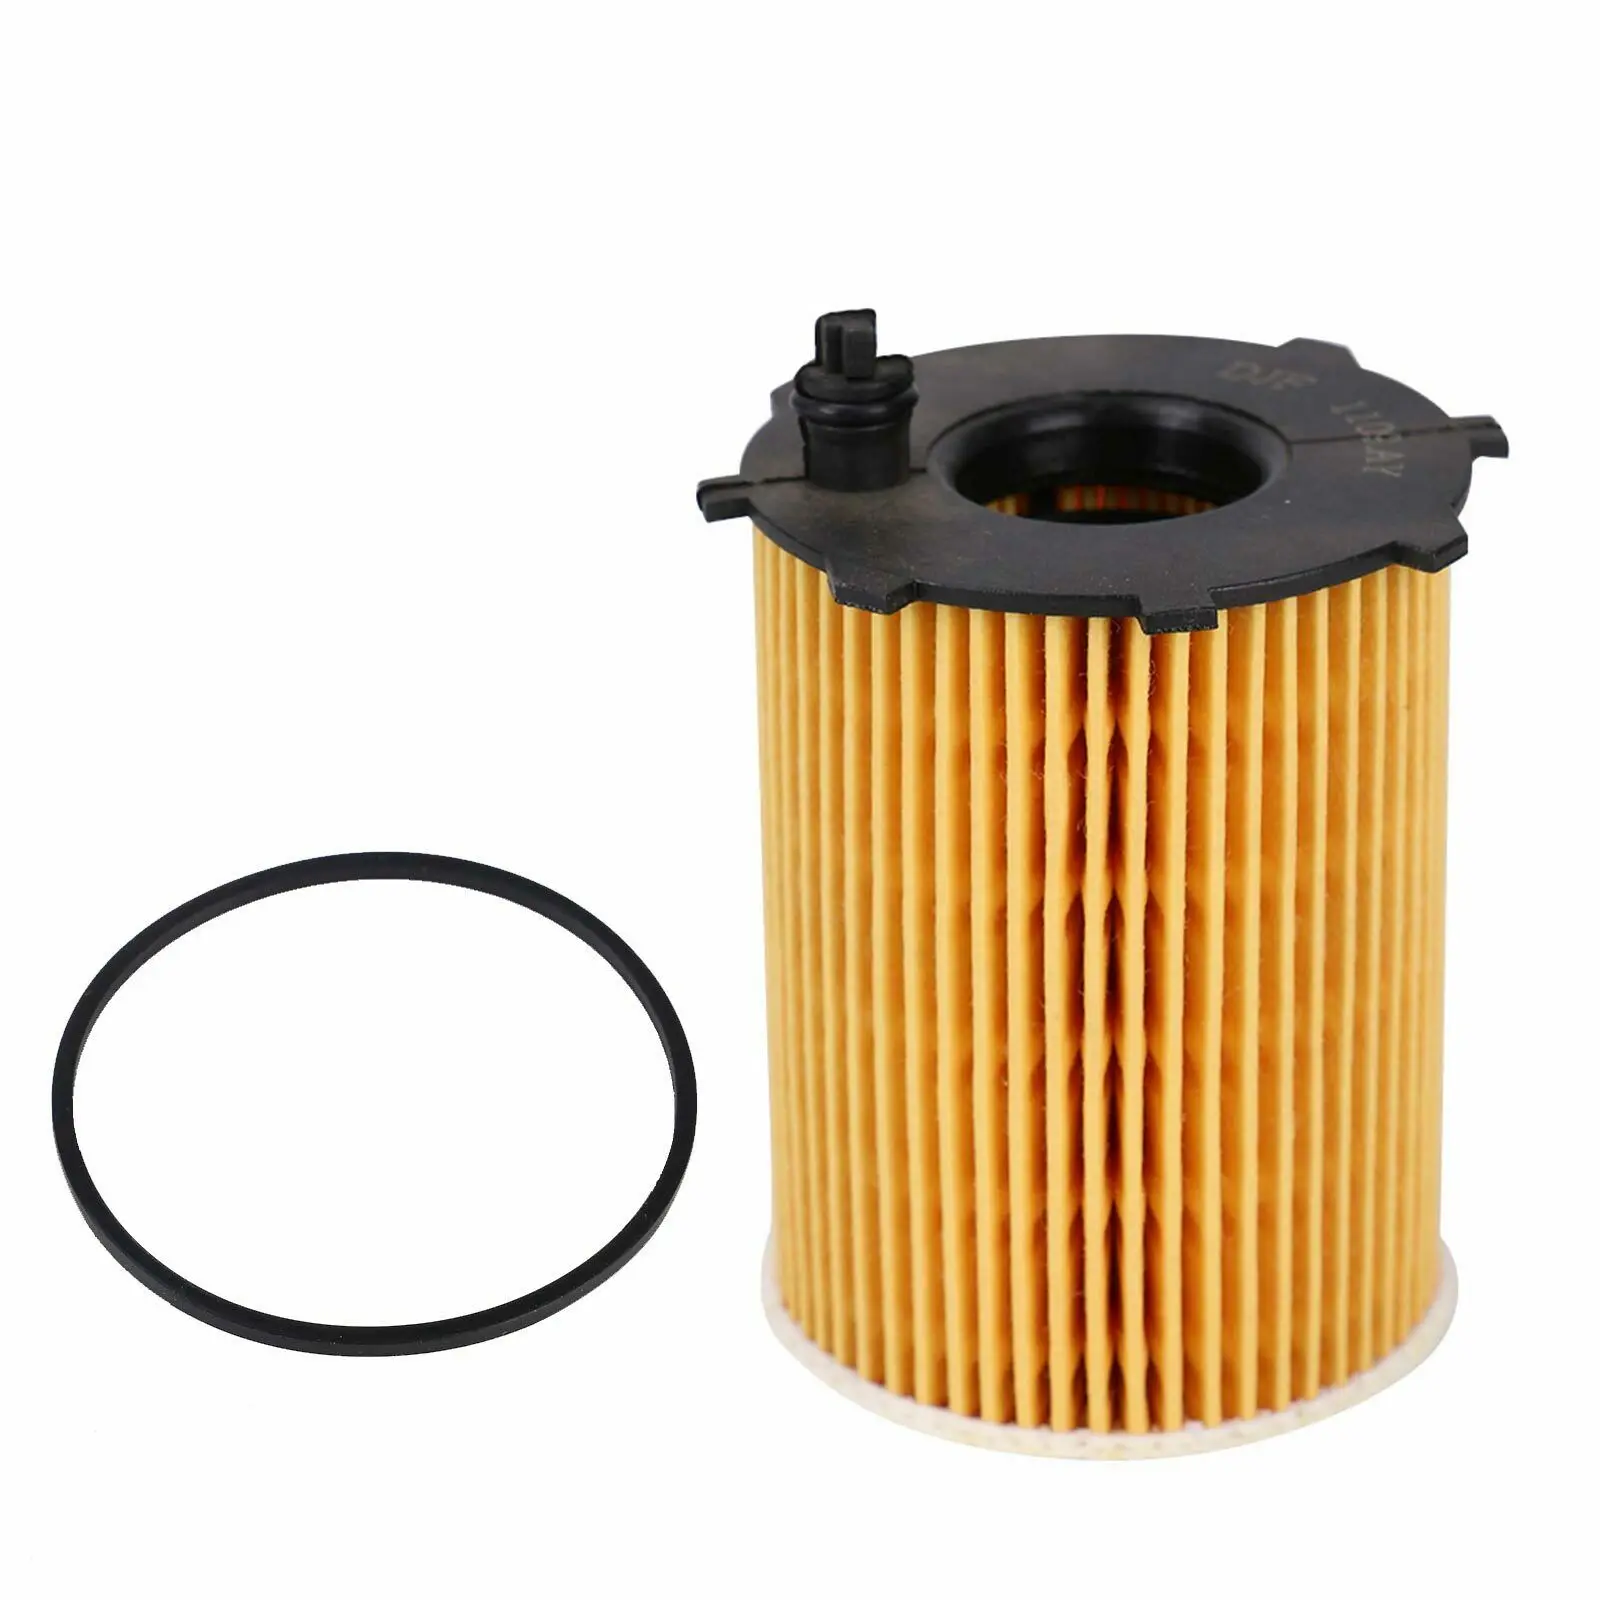 

Suitable For Peugeot ForFor Ford Oil Filter 1109.AY/1359941/5369.96 For Diesel Berlingo C2-6 1.4 &1.6 HDI And For Ford 1.4